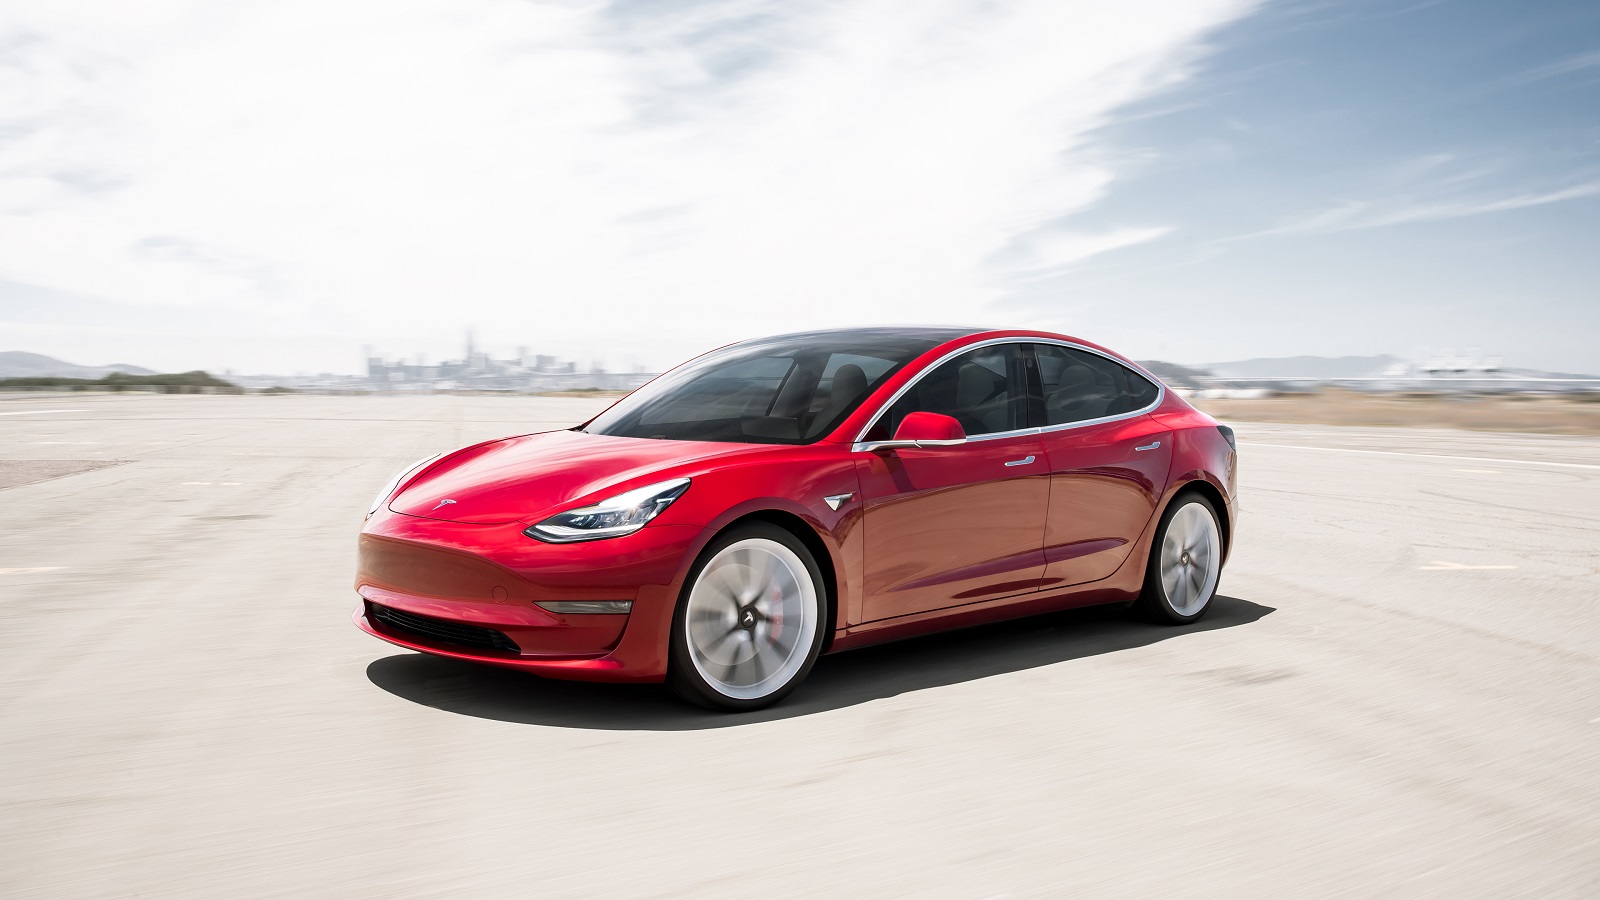 <p class="wp-caption-text">Image Credit: Shutterstock / canadianPhotographer56</p>  <p><span>The Tesla Model 3 continues to lead the charge as one of the most popular electric vehicles in the U.S. market. With its sleek design, impressive range, and cutting-edge technology, the Model 3 has solidified Tesla’s position as a leader in the EV industry.</span></p>